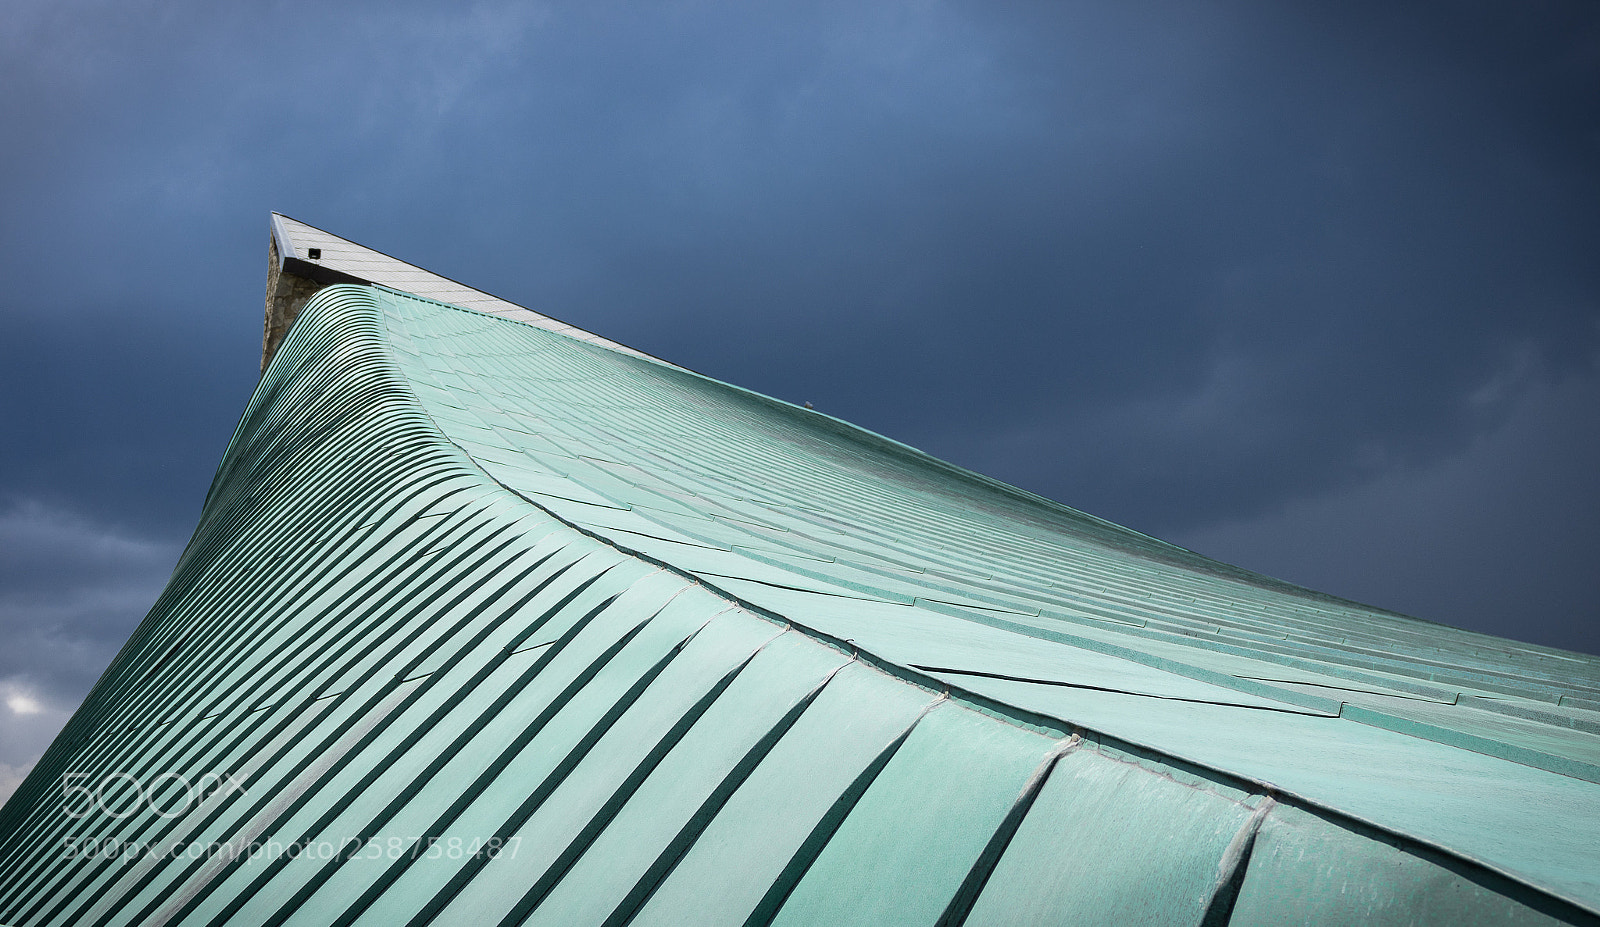 Pentax K-3 sample photo. Copper roof photography